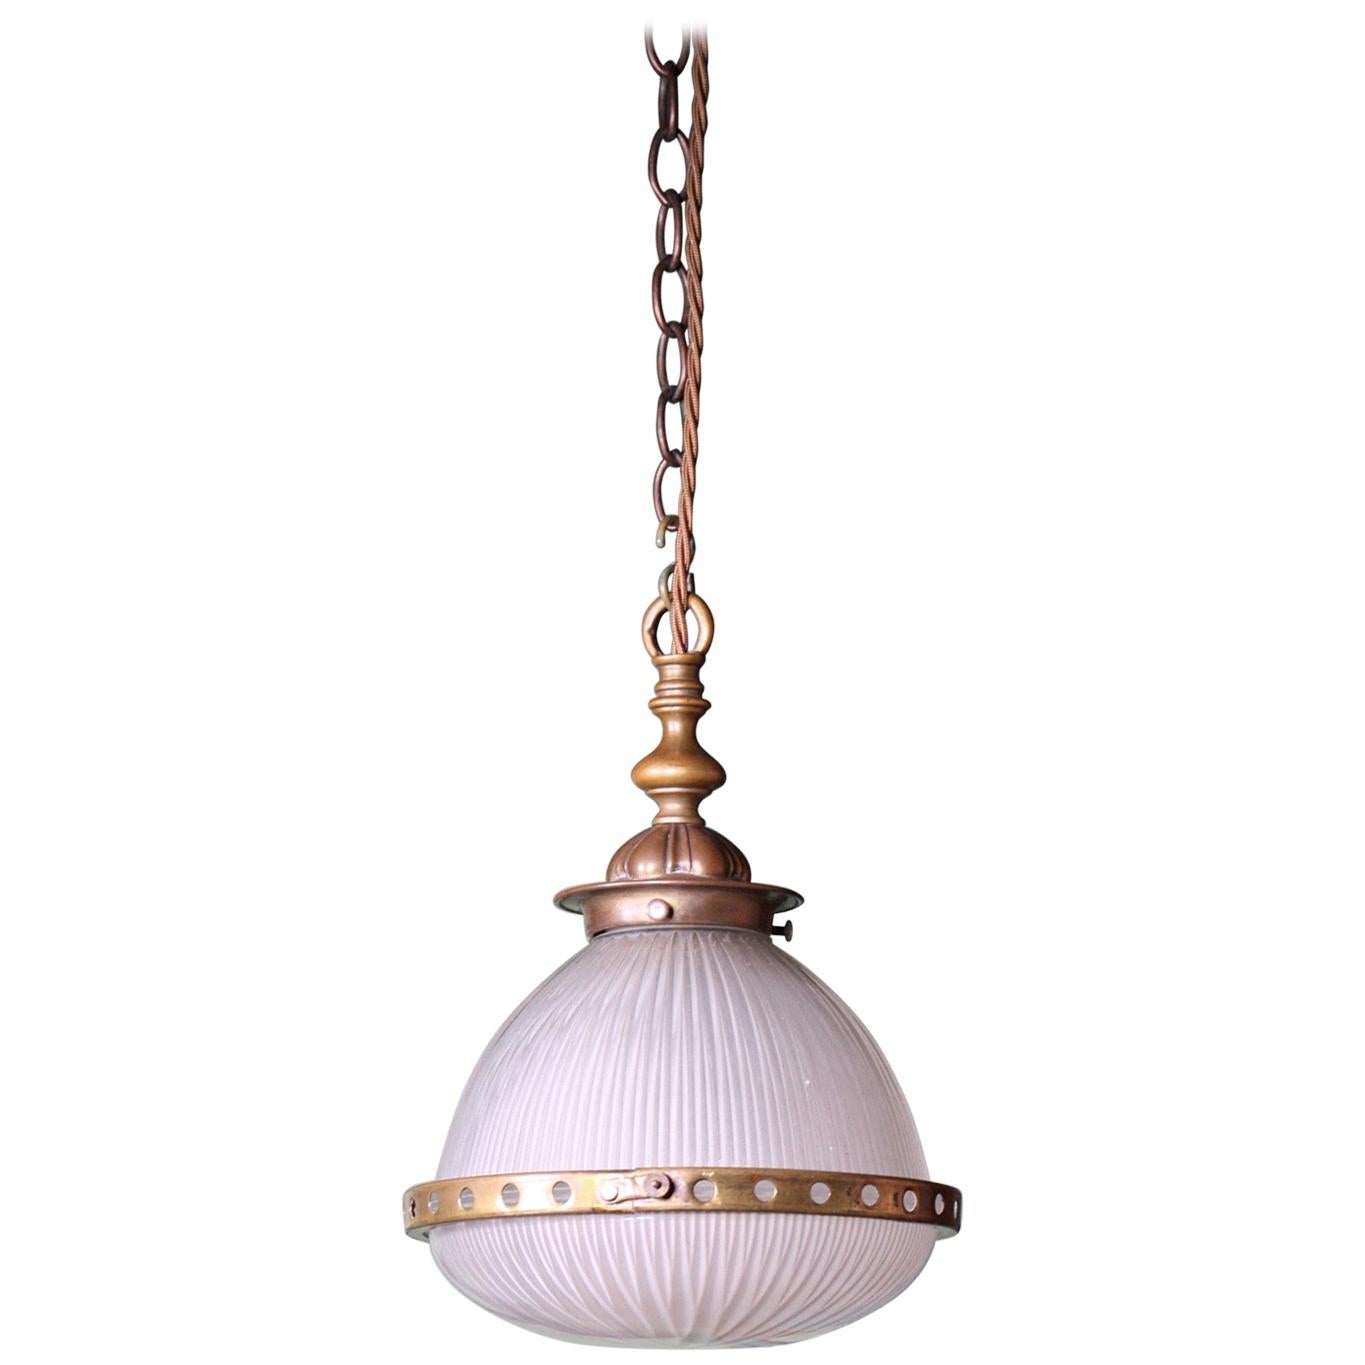 Early 20th Century French Petit Holophane Glass and Brass Lantern Light Pendant